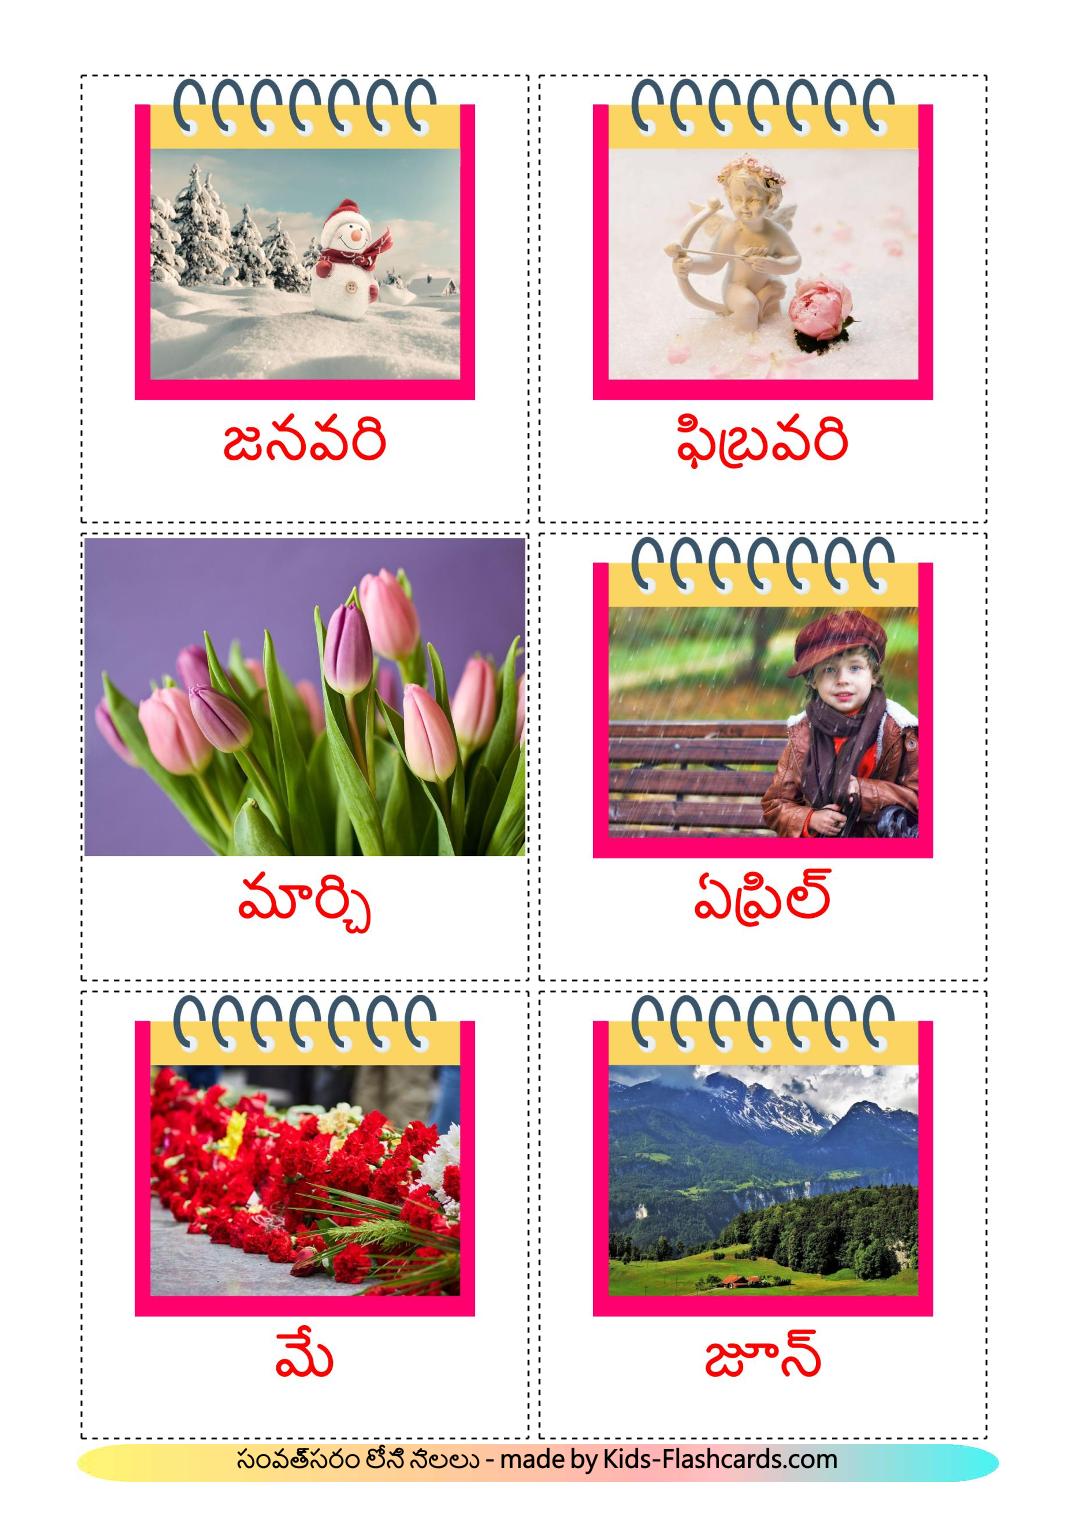 Months of the Year - 12 Free Printable telugu Flashcards 